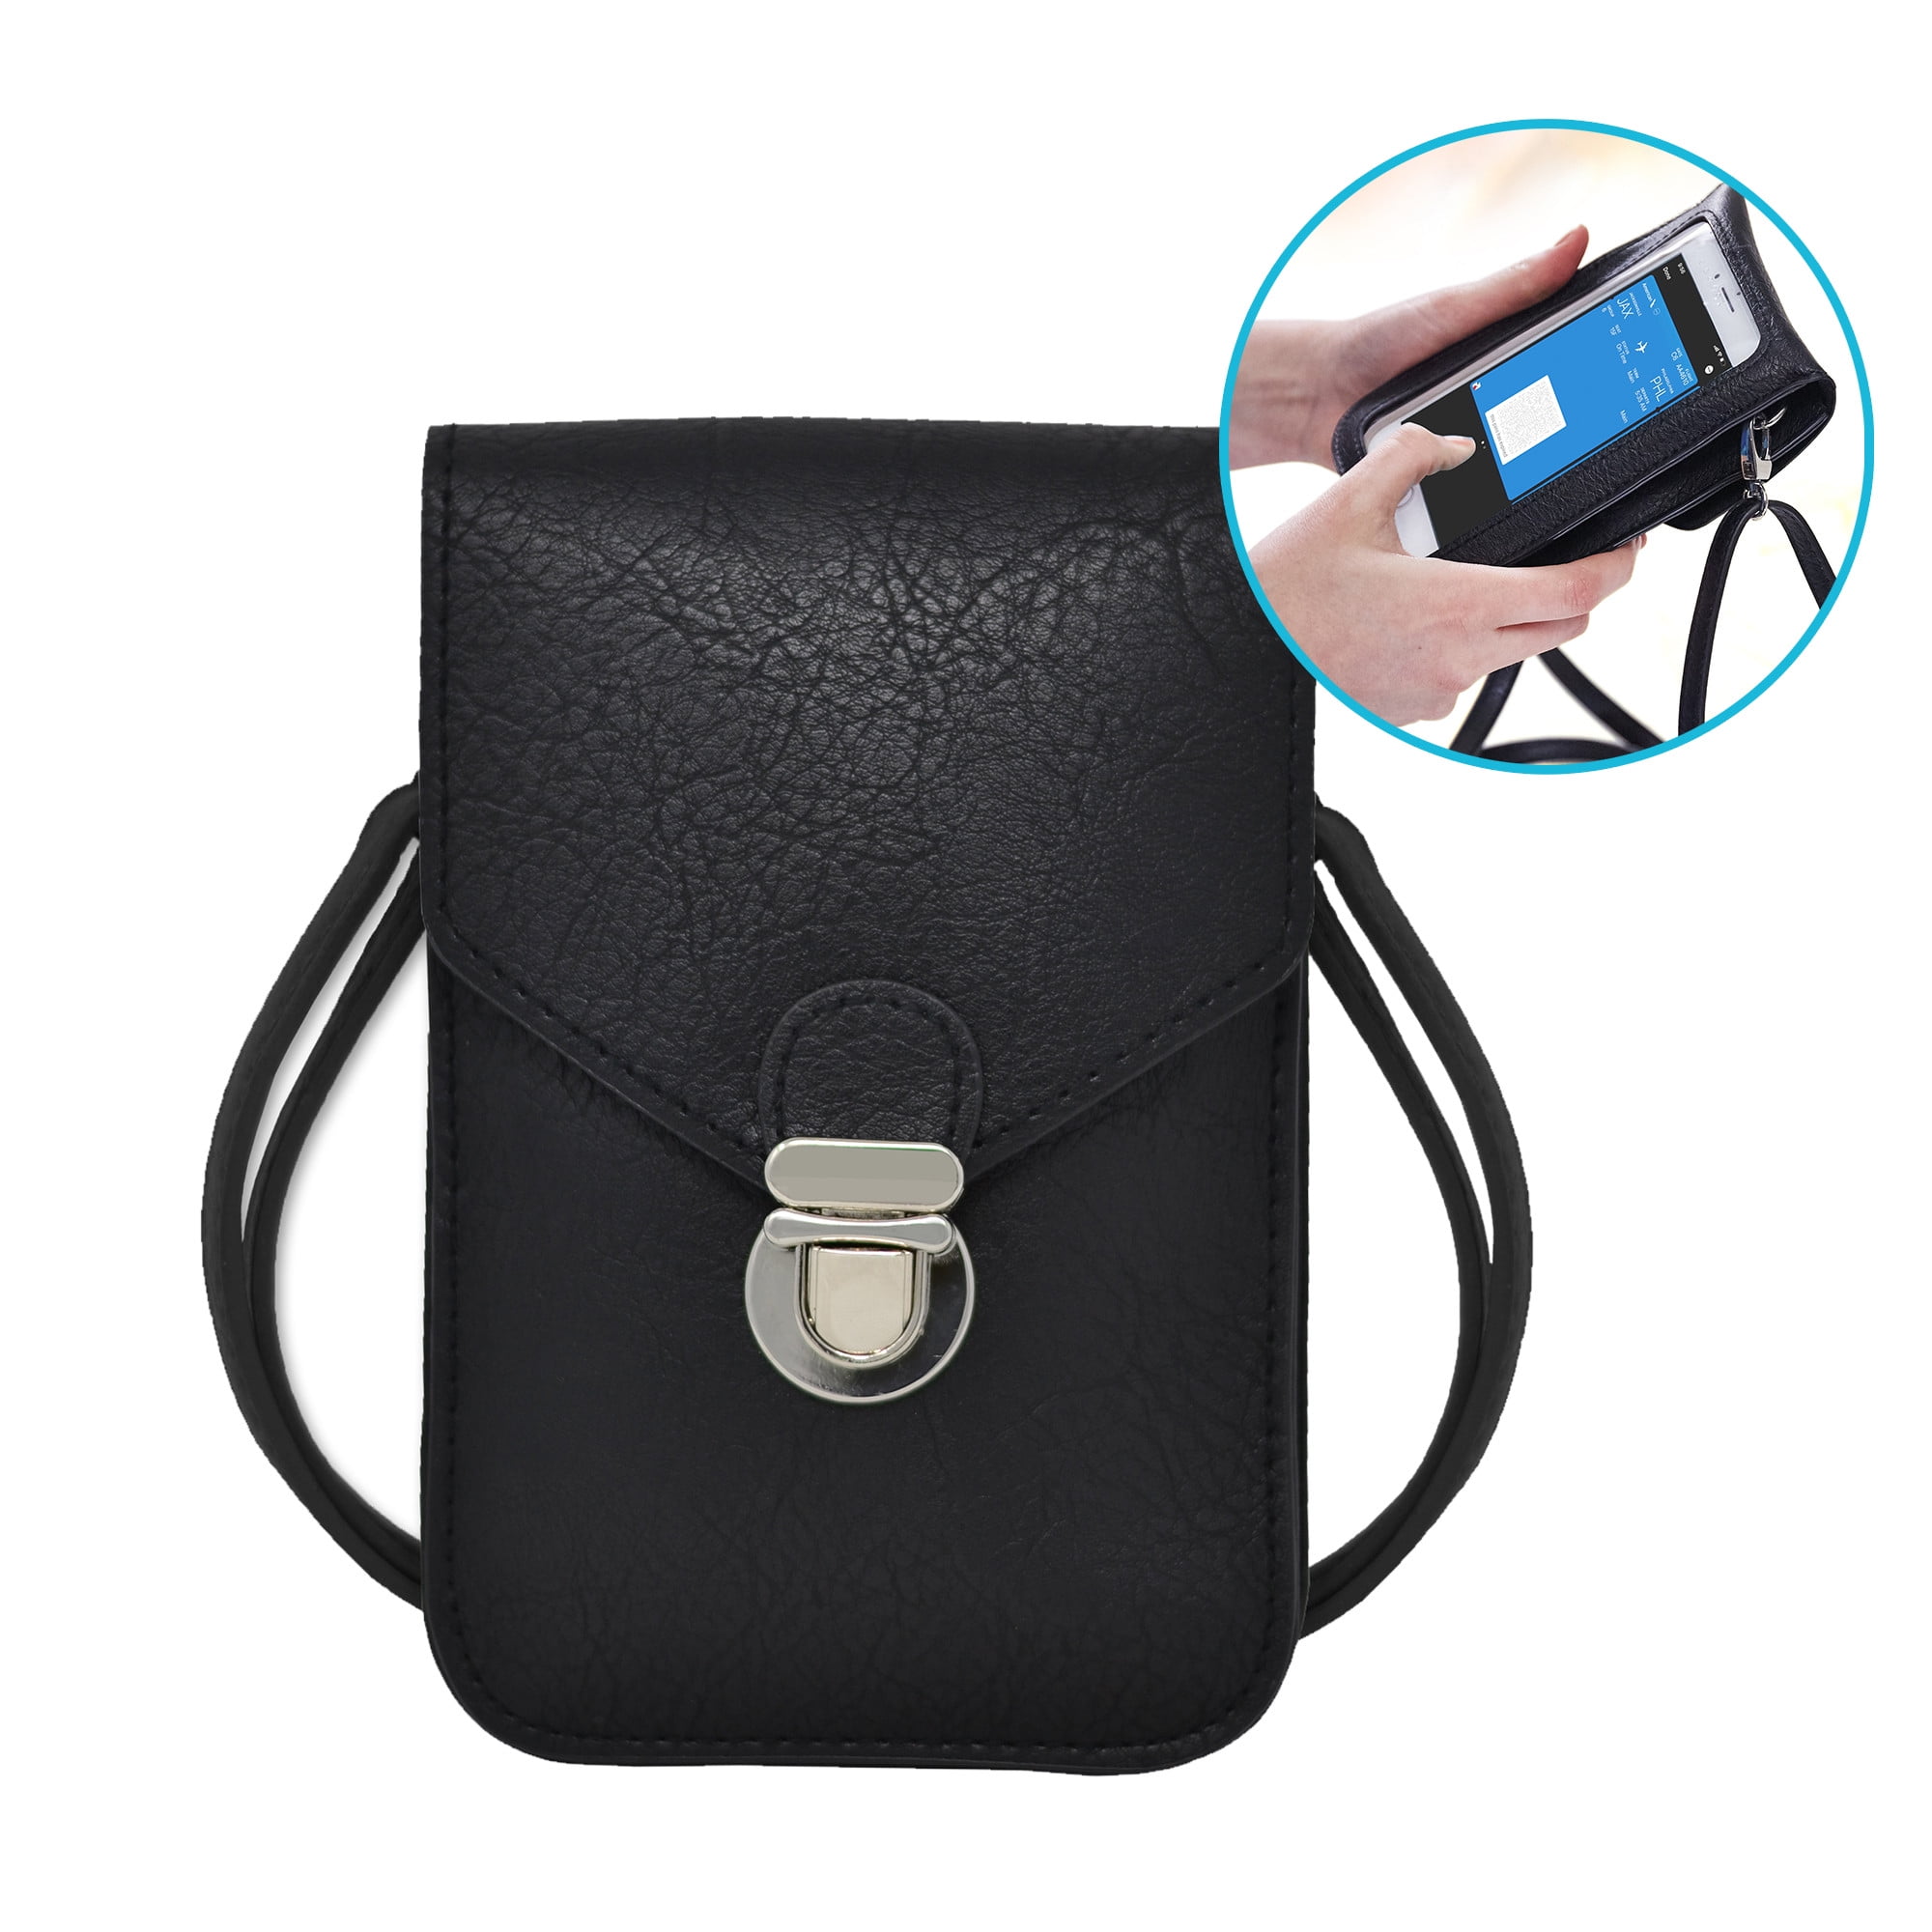 Touch Screen Purse by Lori Greiner Fits Most Smartphones Stylish Crossbody with Shoulder Strap RFID Keeps Cash Credit Cards Phone Screens Safe 1394a6bb 6e1f 474c 91cb b34cd0485206.cc9aab64c0f123de75e40335784a77fe